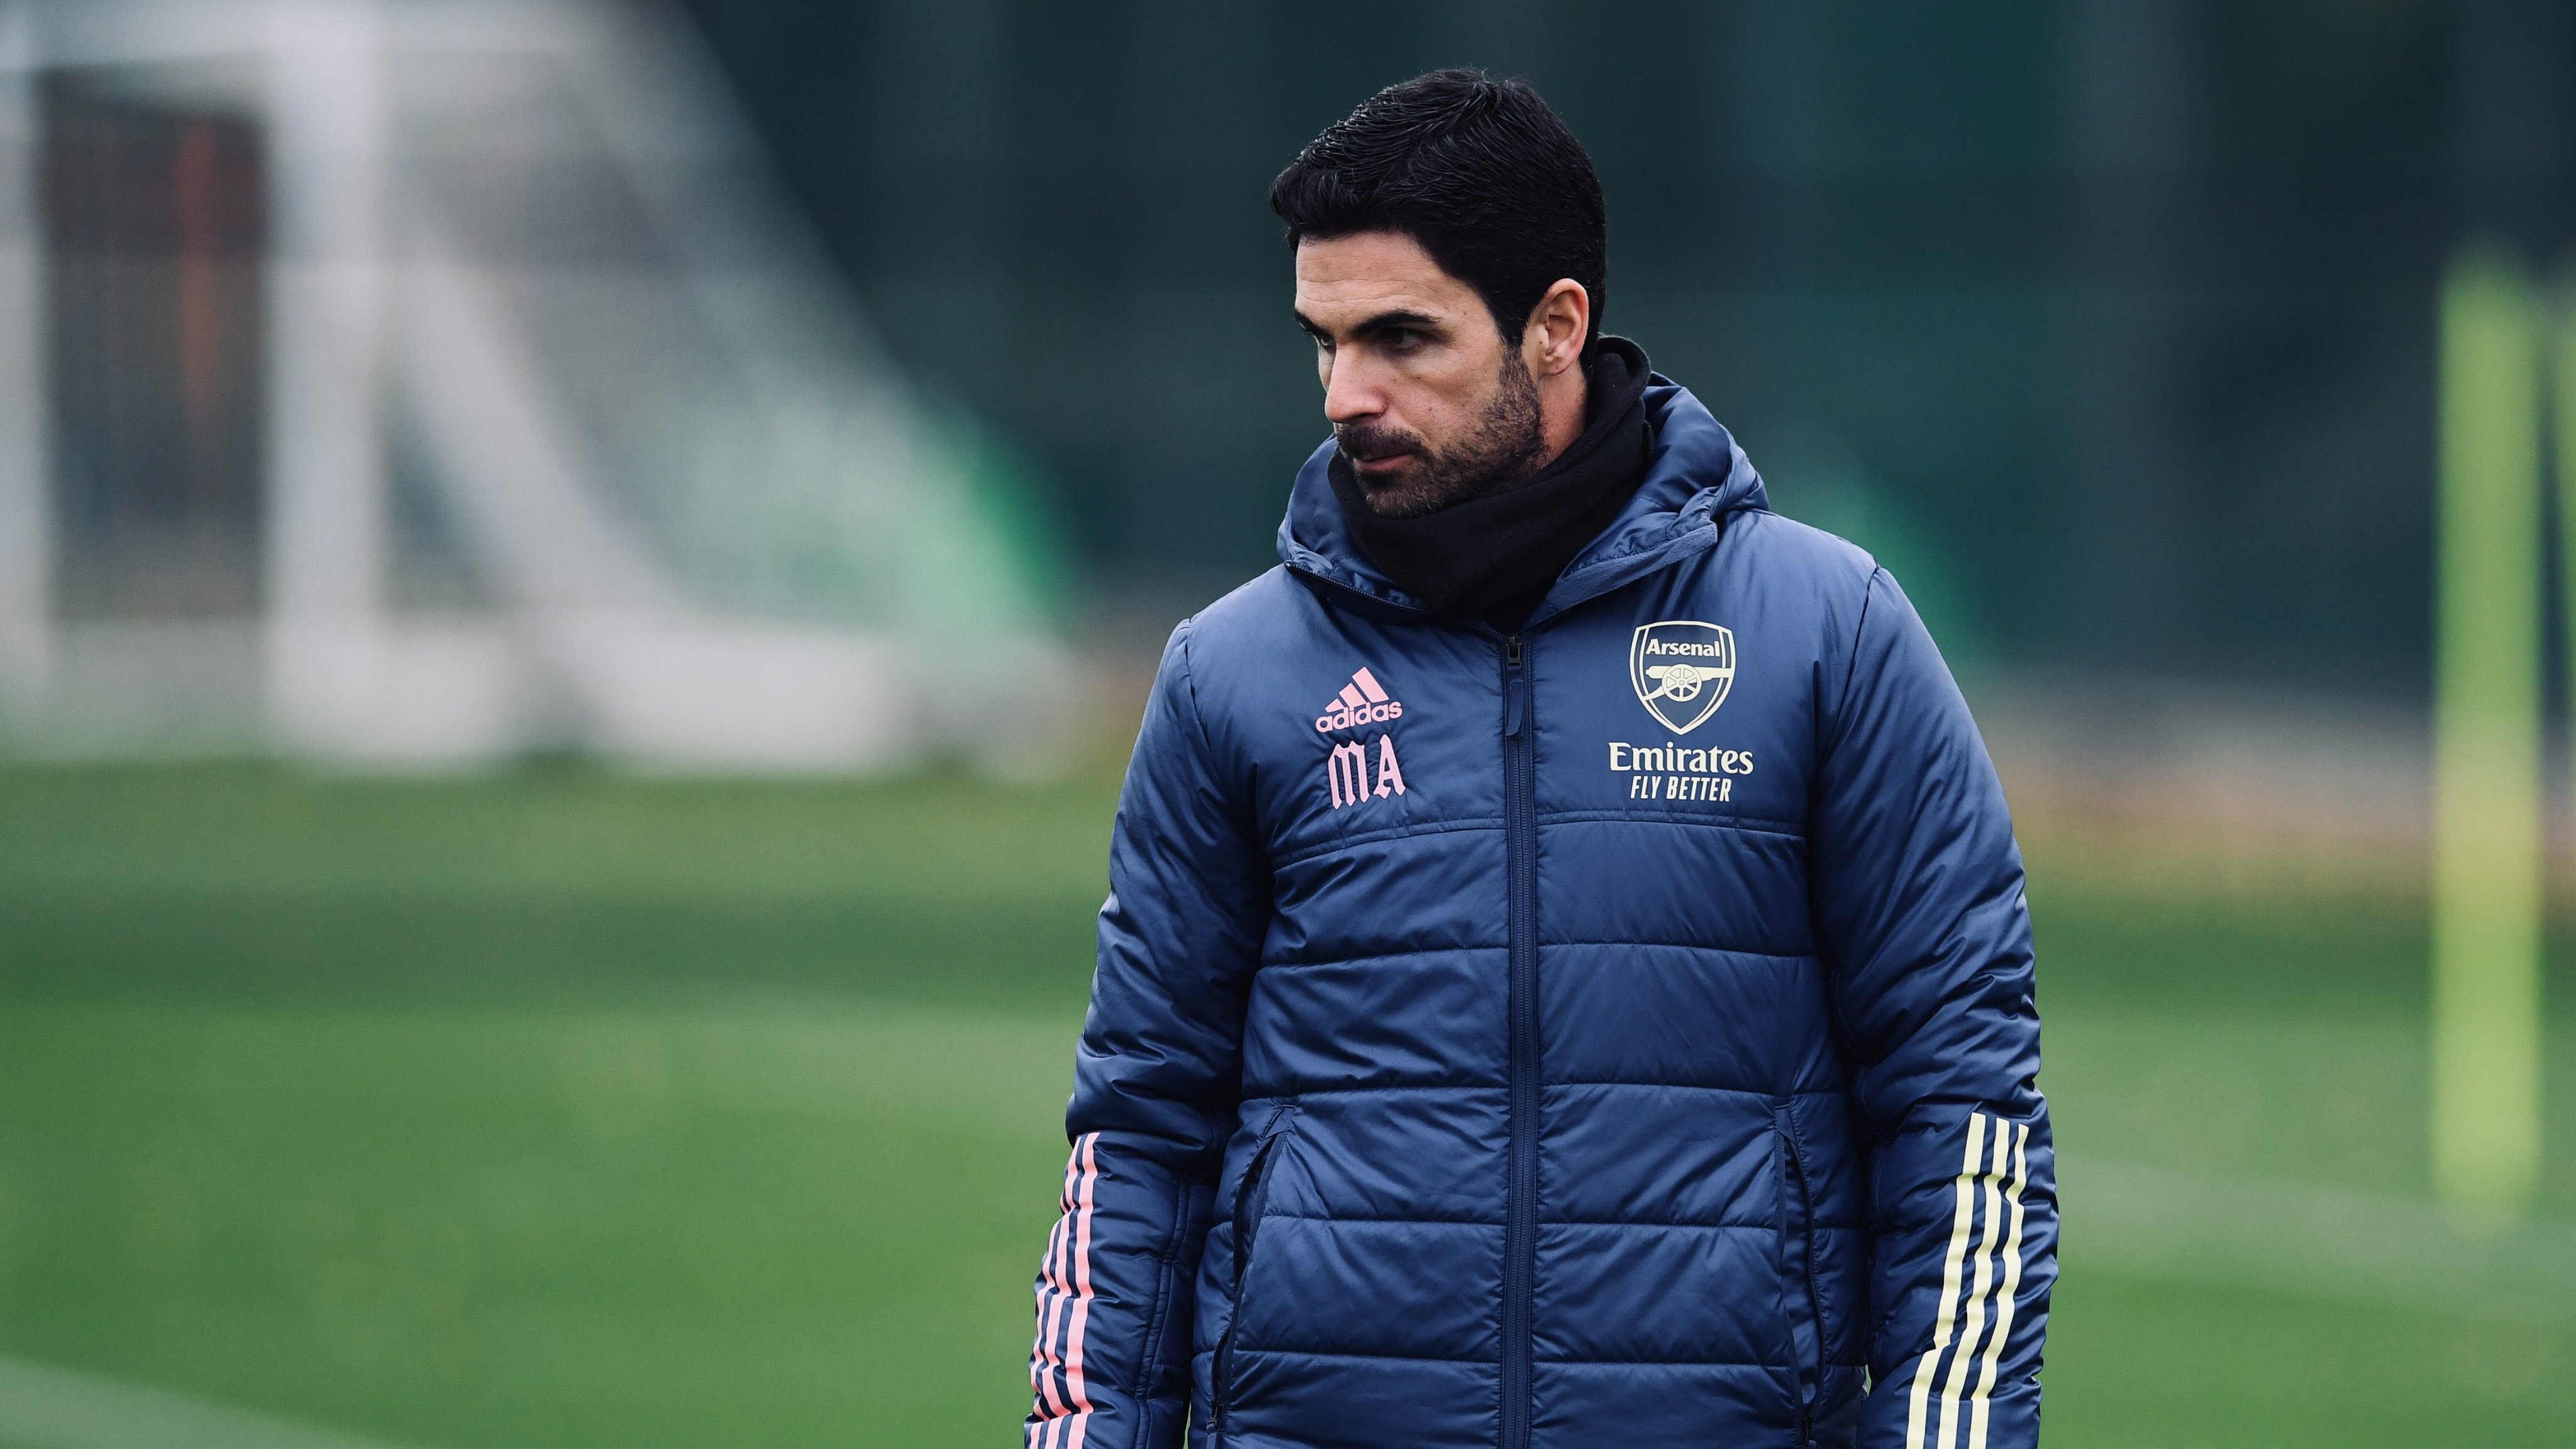 Important that we take little bit care of the environment for managers, admits Mikel Arteta